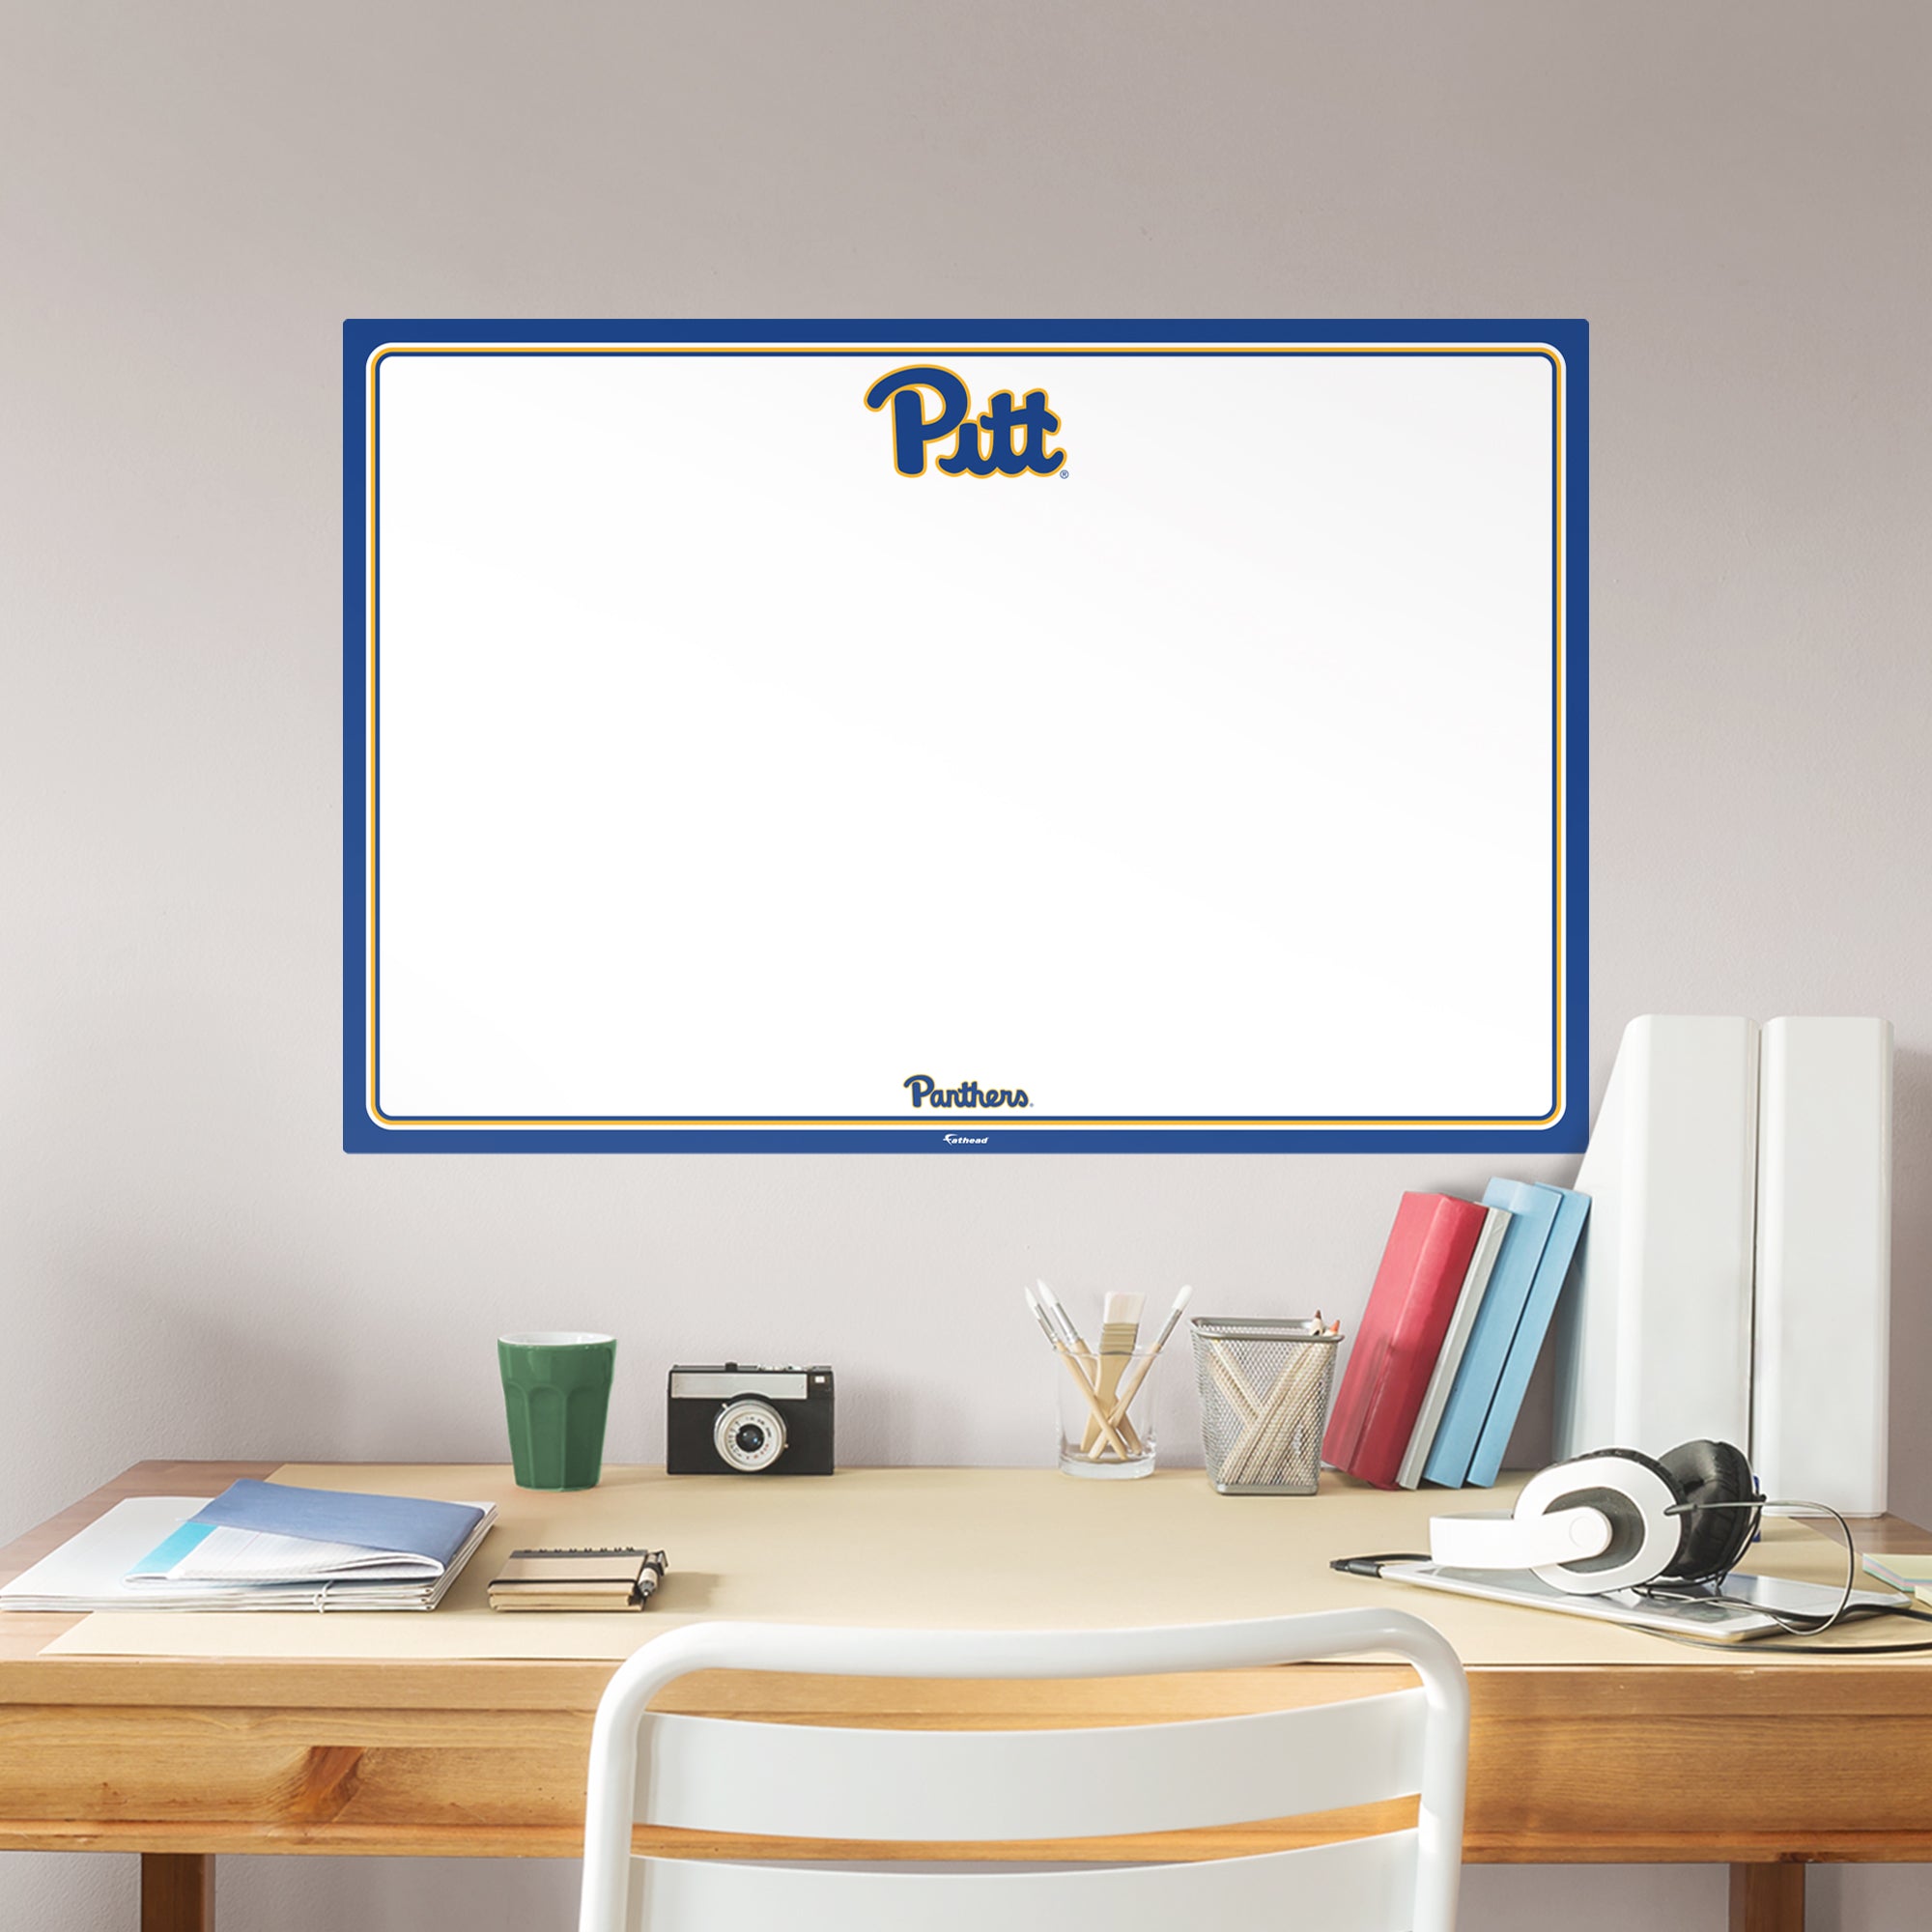 Pittsburgh Panthers: Dry Erase Whiteboard - Officially Licensed NCAA Removable Wall Decal XL by Fathead | Vinyl